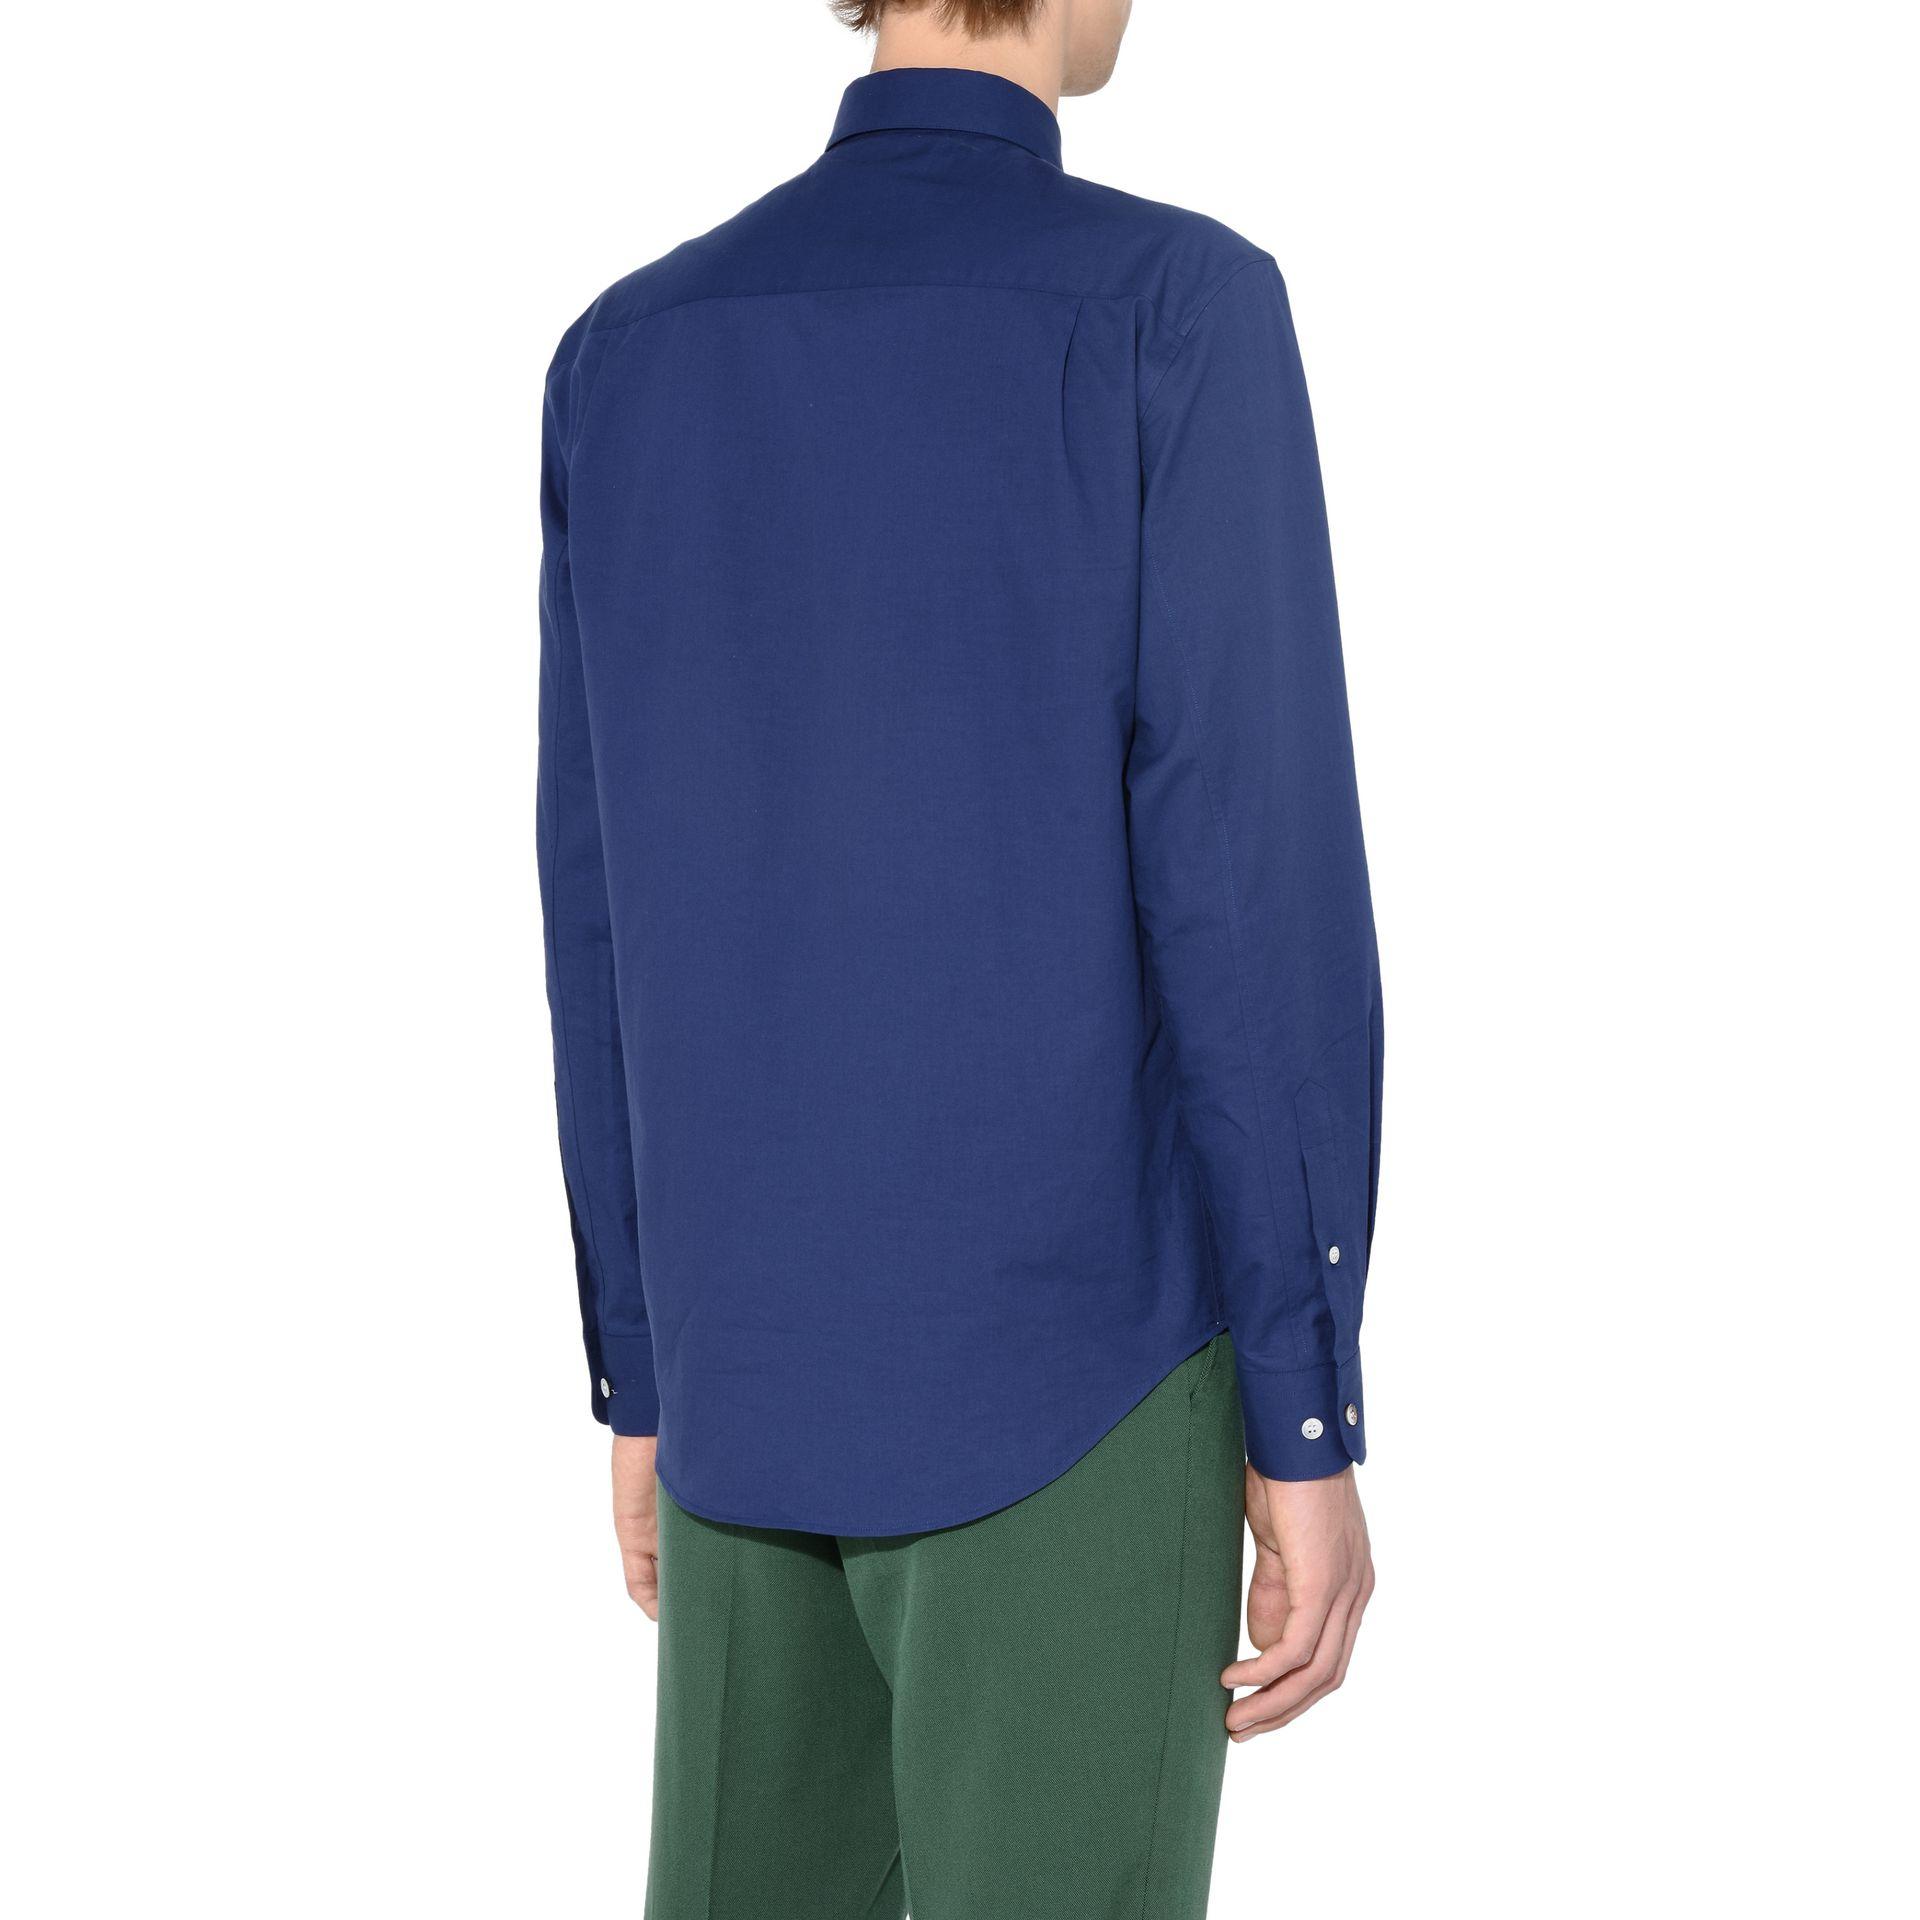 Stella McCartney Ink Embroidered Cotton Shirt in Blue for Men - Lyst